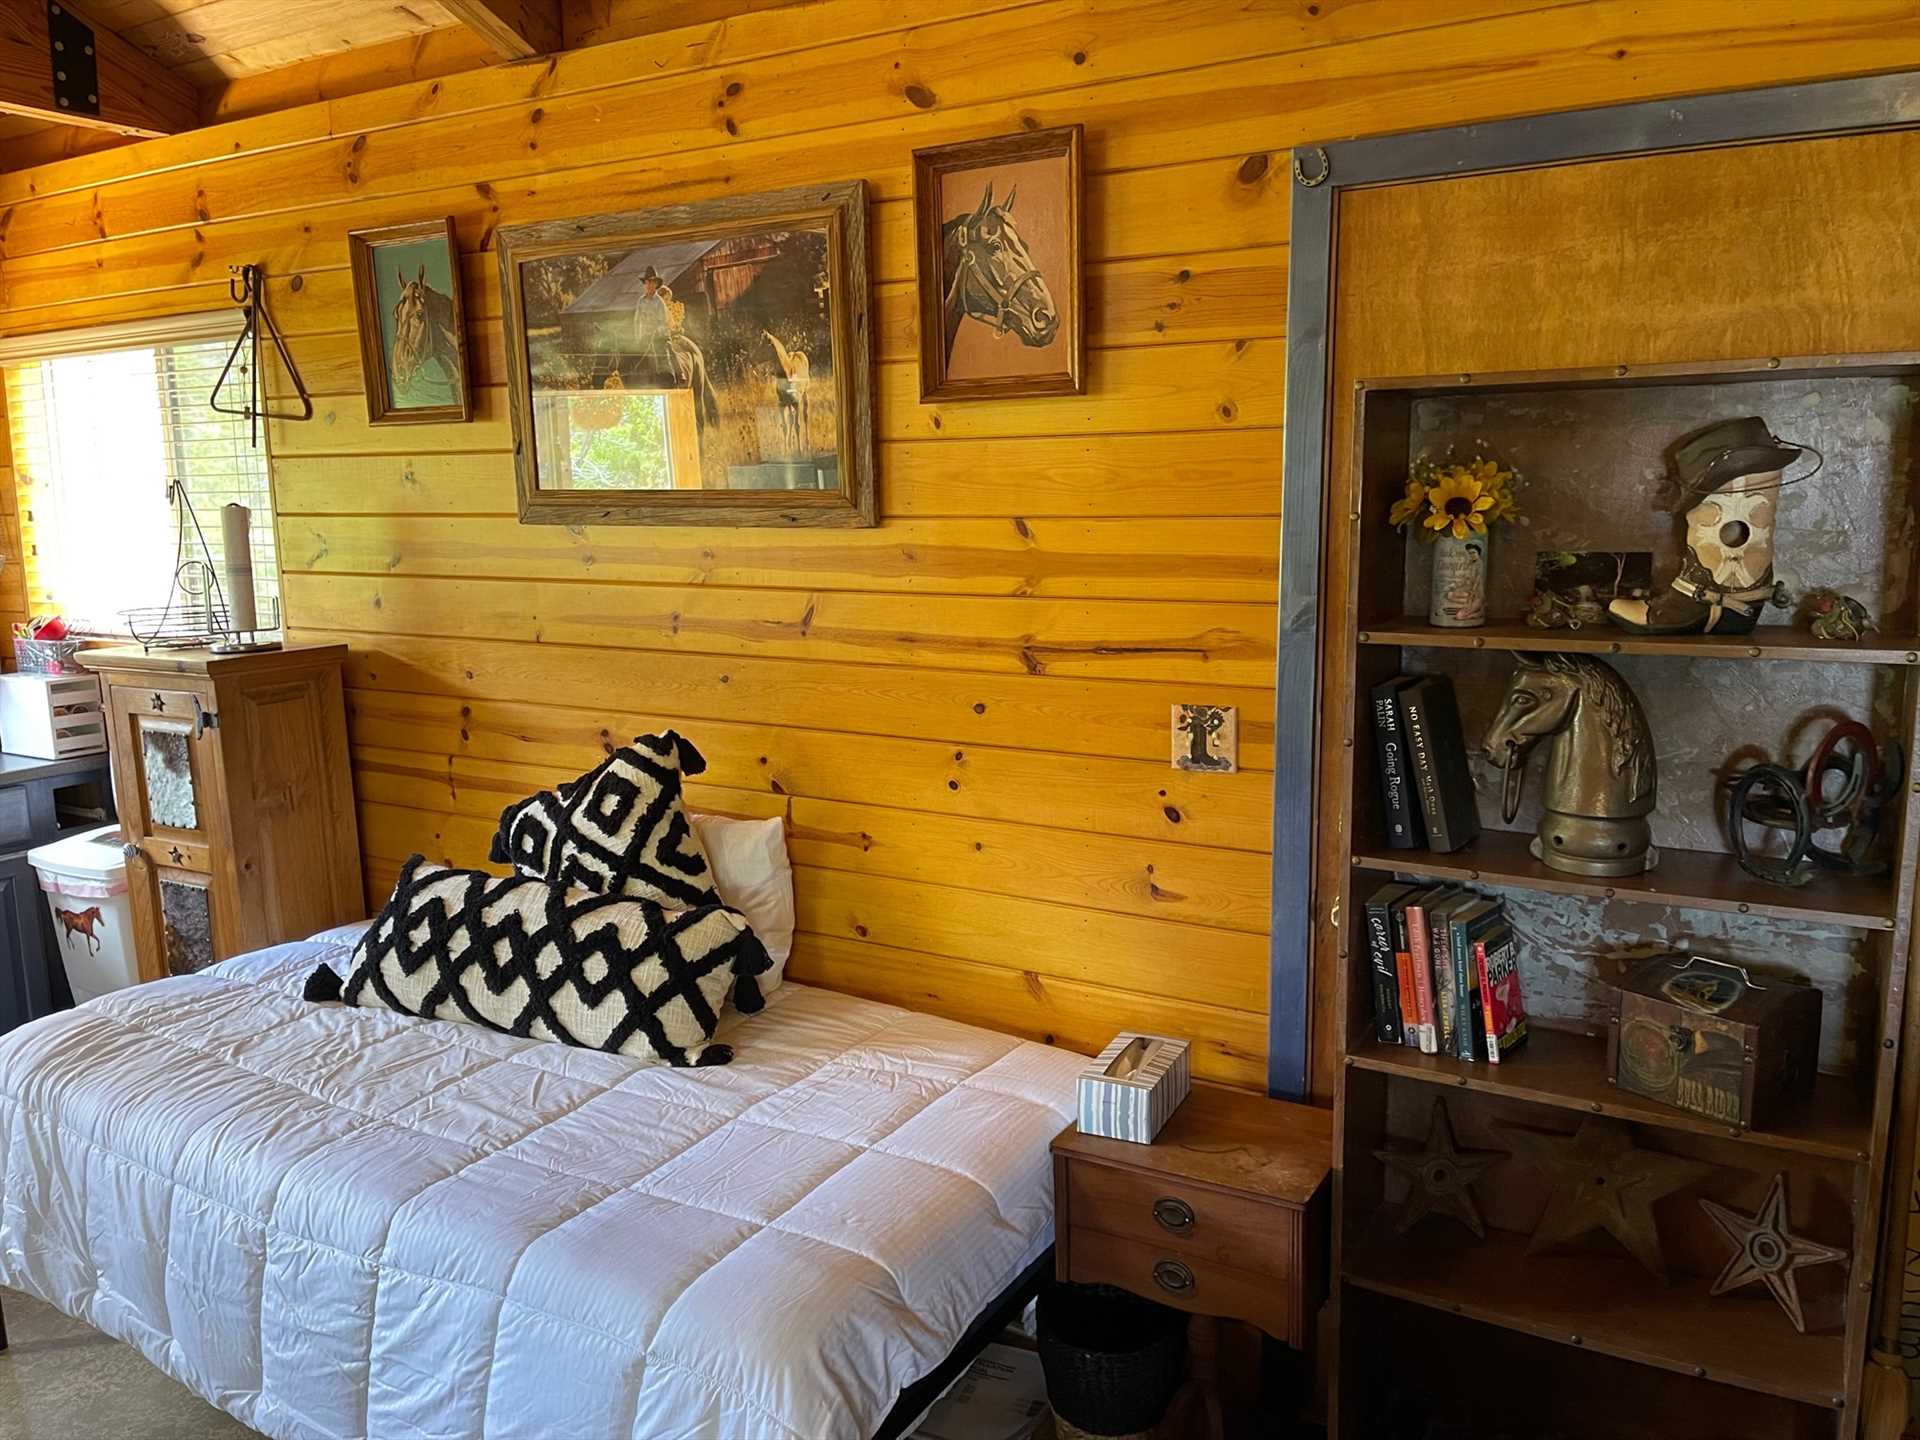                                                 Giddy Up also has a daybed that can sleep up to two small children...but you might want to use the cozy guest cabin as a romantic escape for two!